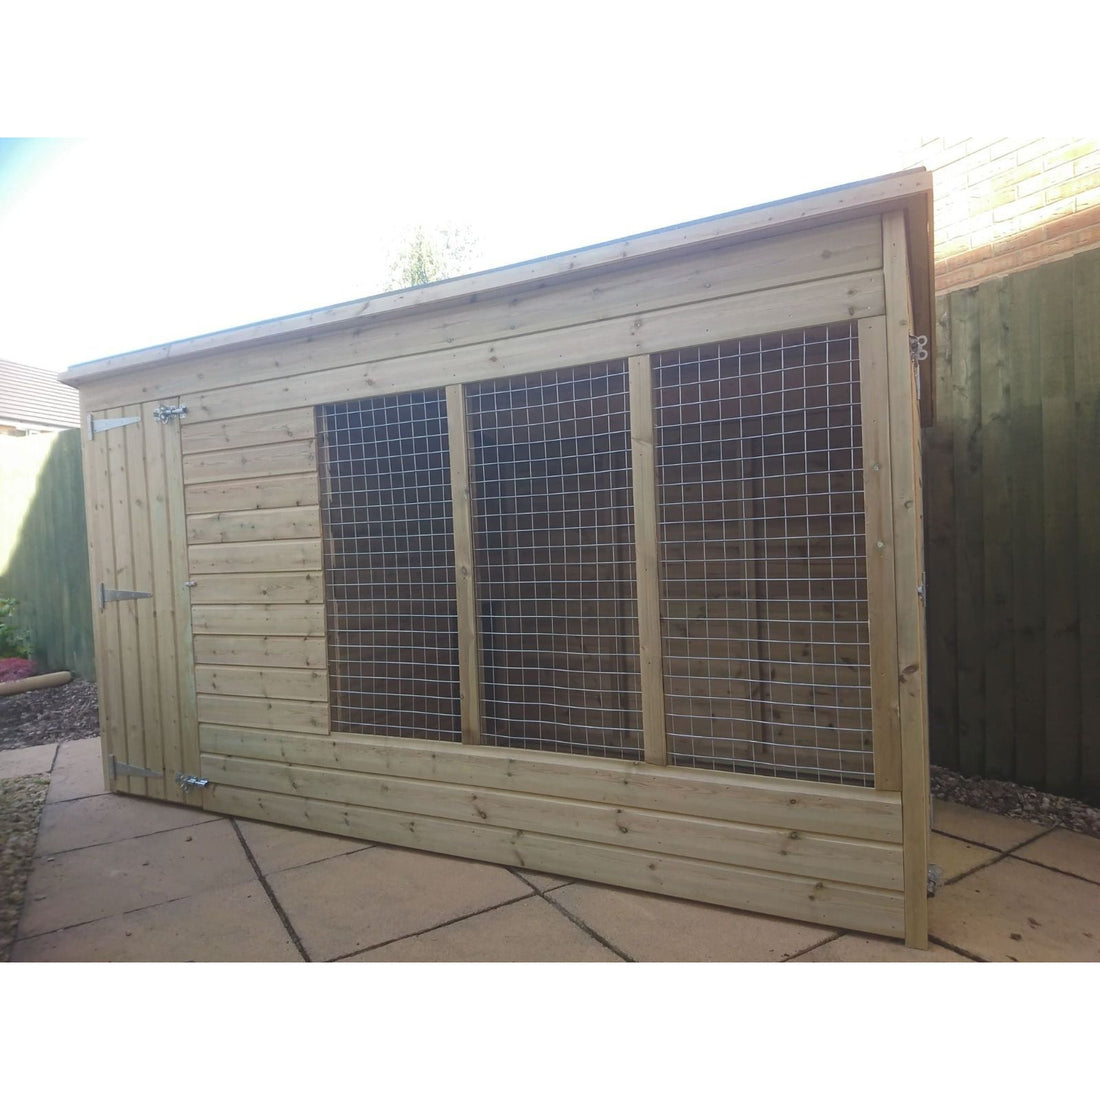 Astonia Dog Kennel and Run - Fitted - 12 sizes